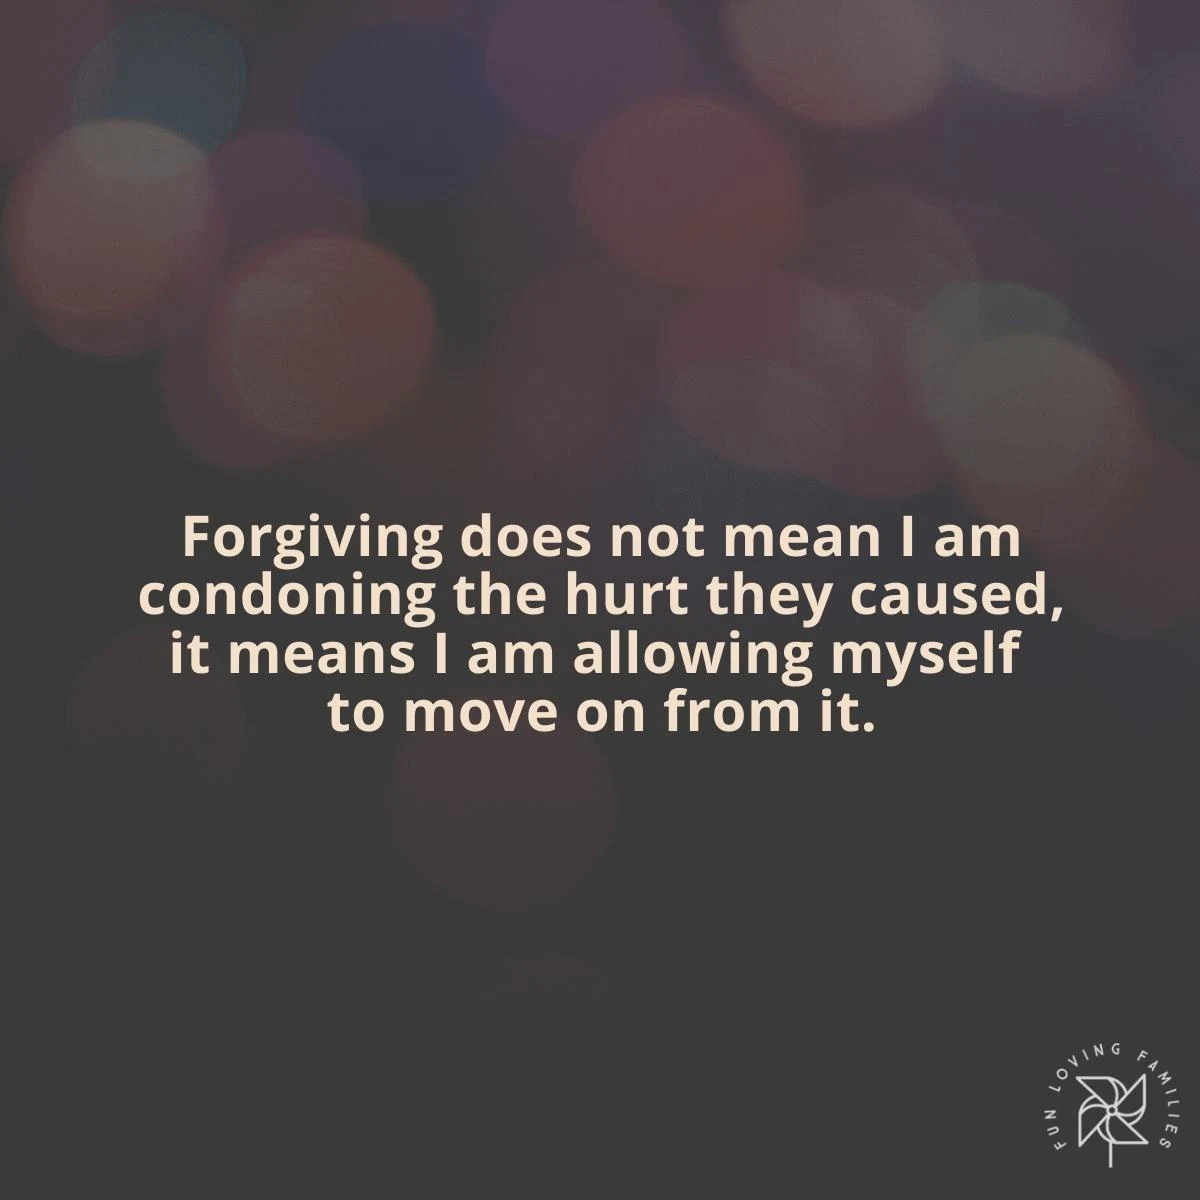 Forgiving does not mean I am condoning the hurt they caused affirmation image